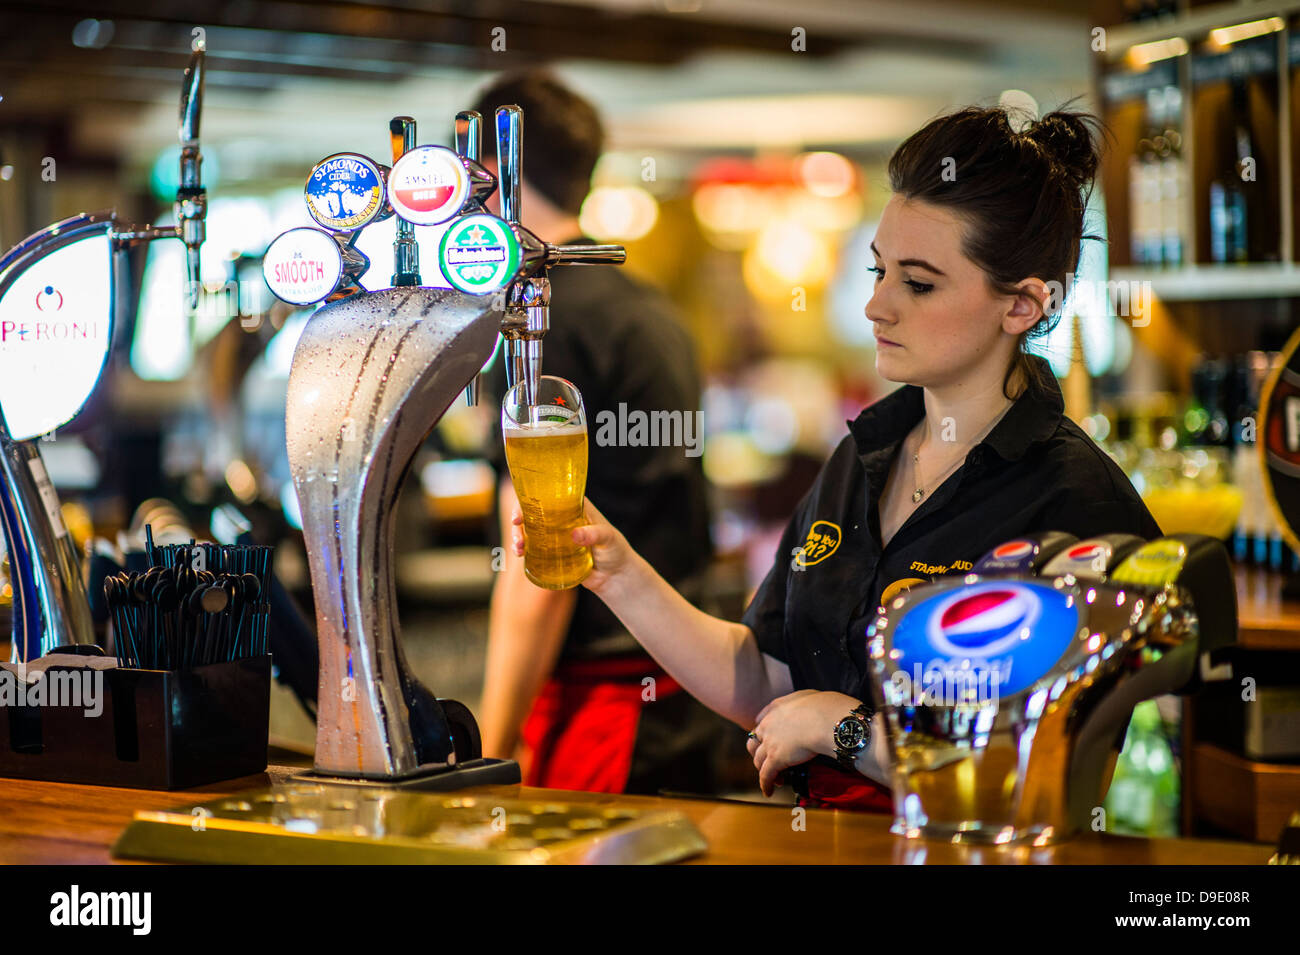 https://c8.alamy.com/comp/D9E08R/a-barmaid-working-pouring-a-pint-of-lager-beer-in-a-pub-bar-uk-D9E08R.jpg